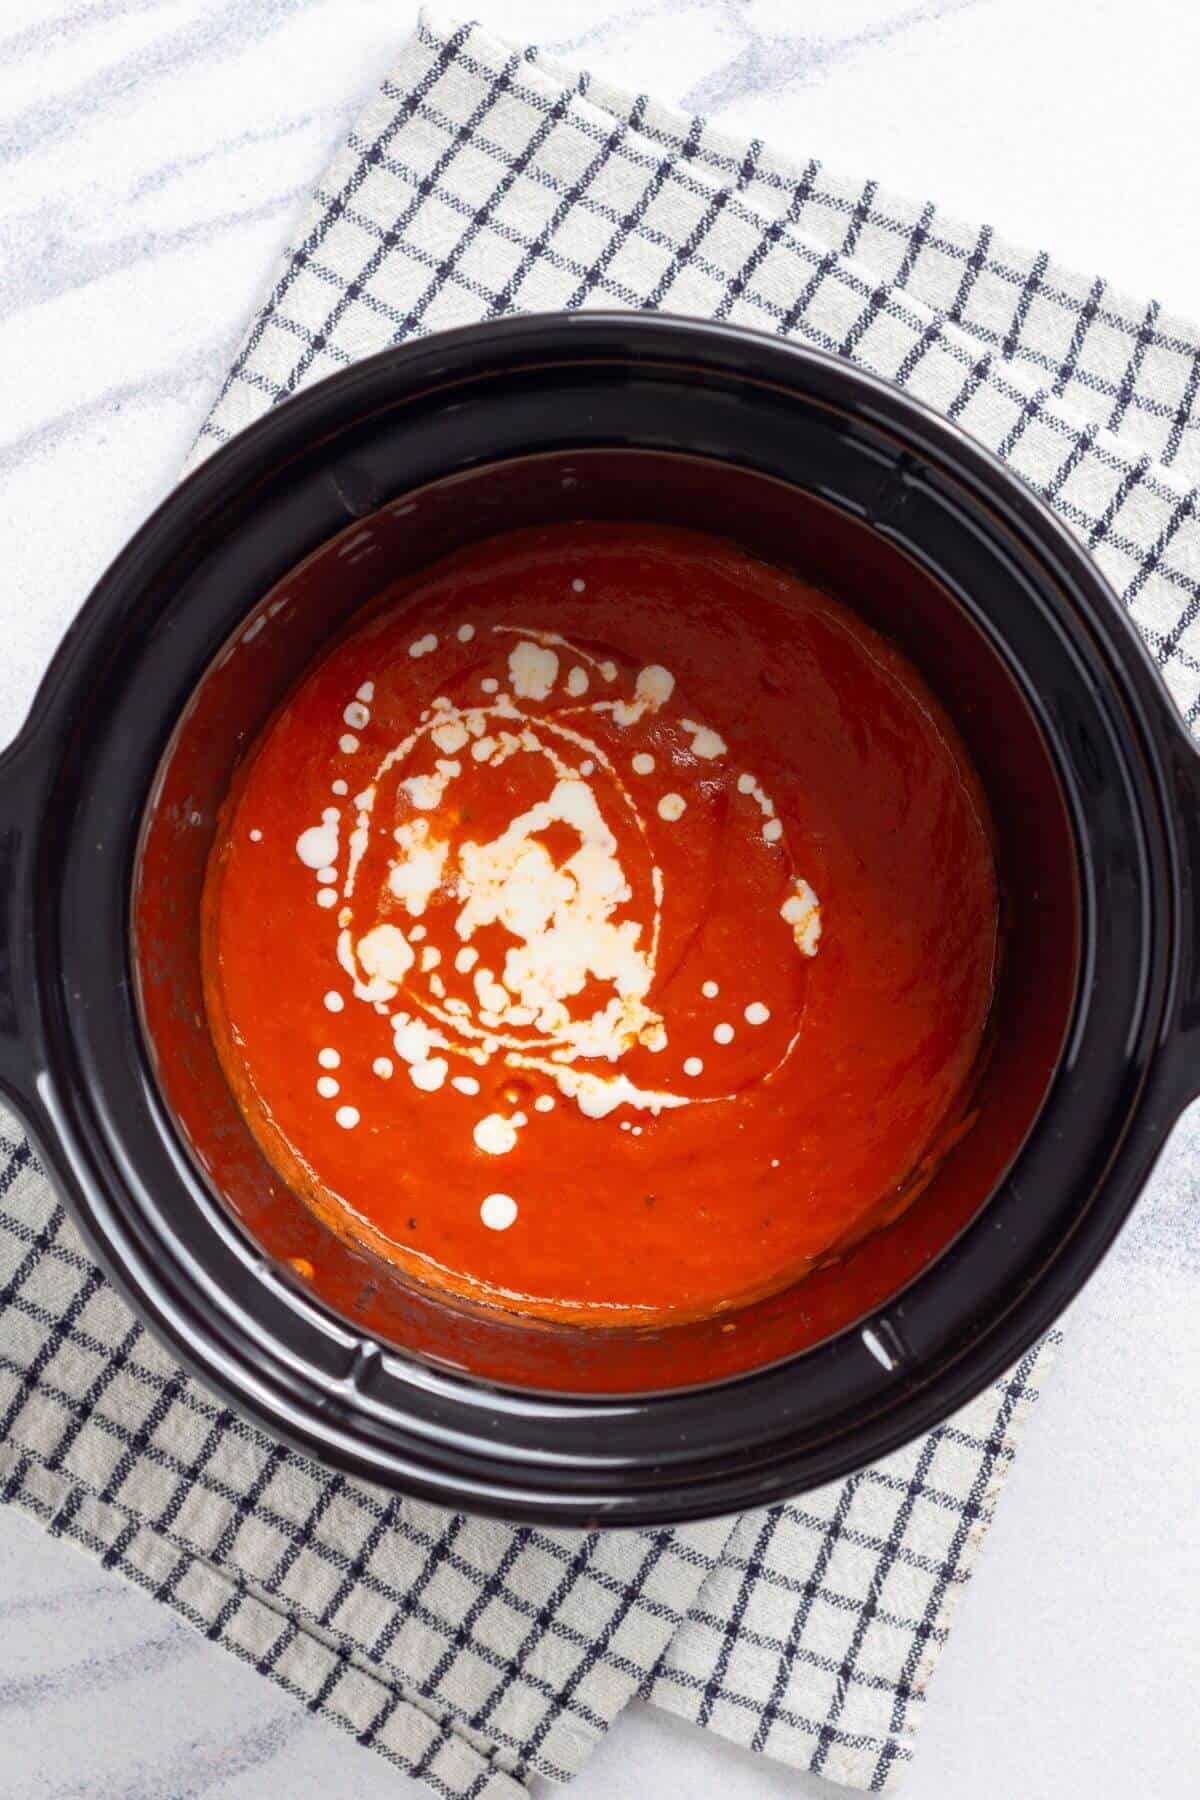 A bowl of tomato soup with a swirl of cream, on a black and white checkered napkin.